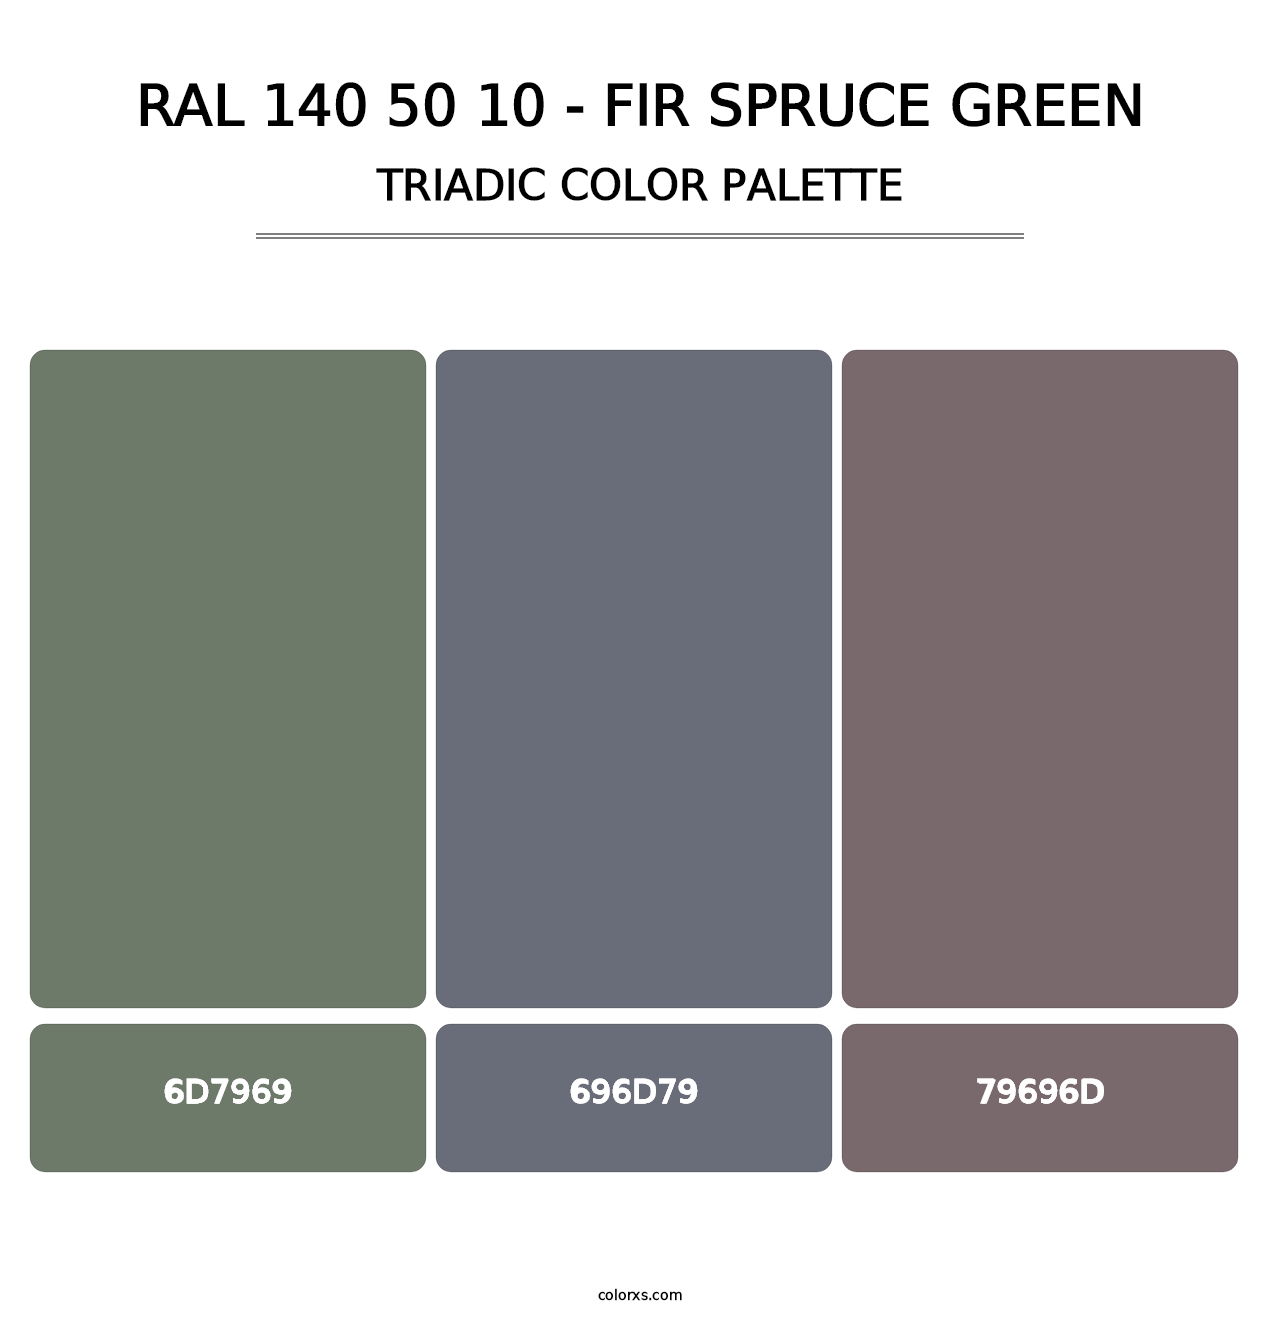 RAL 140 50 10 - Fir Spruce Green - Triadic Color Palette